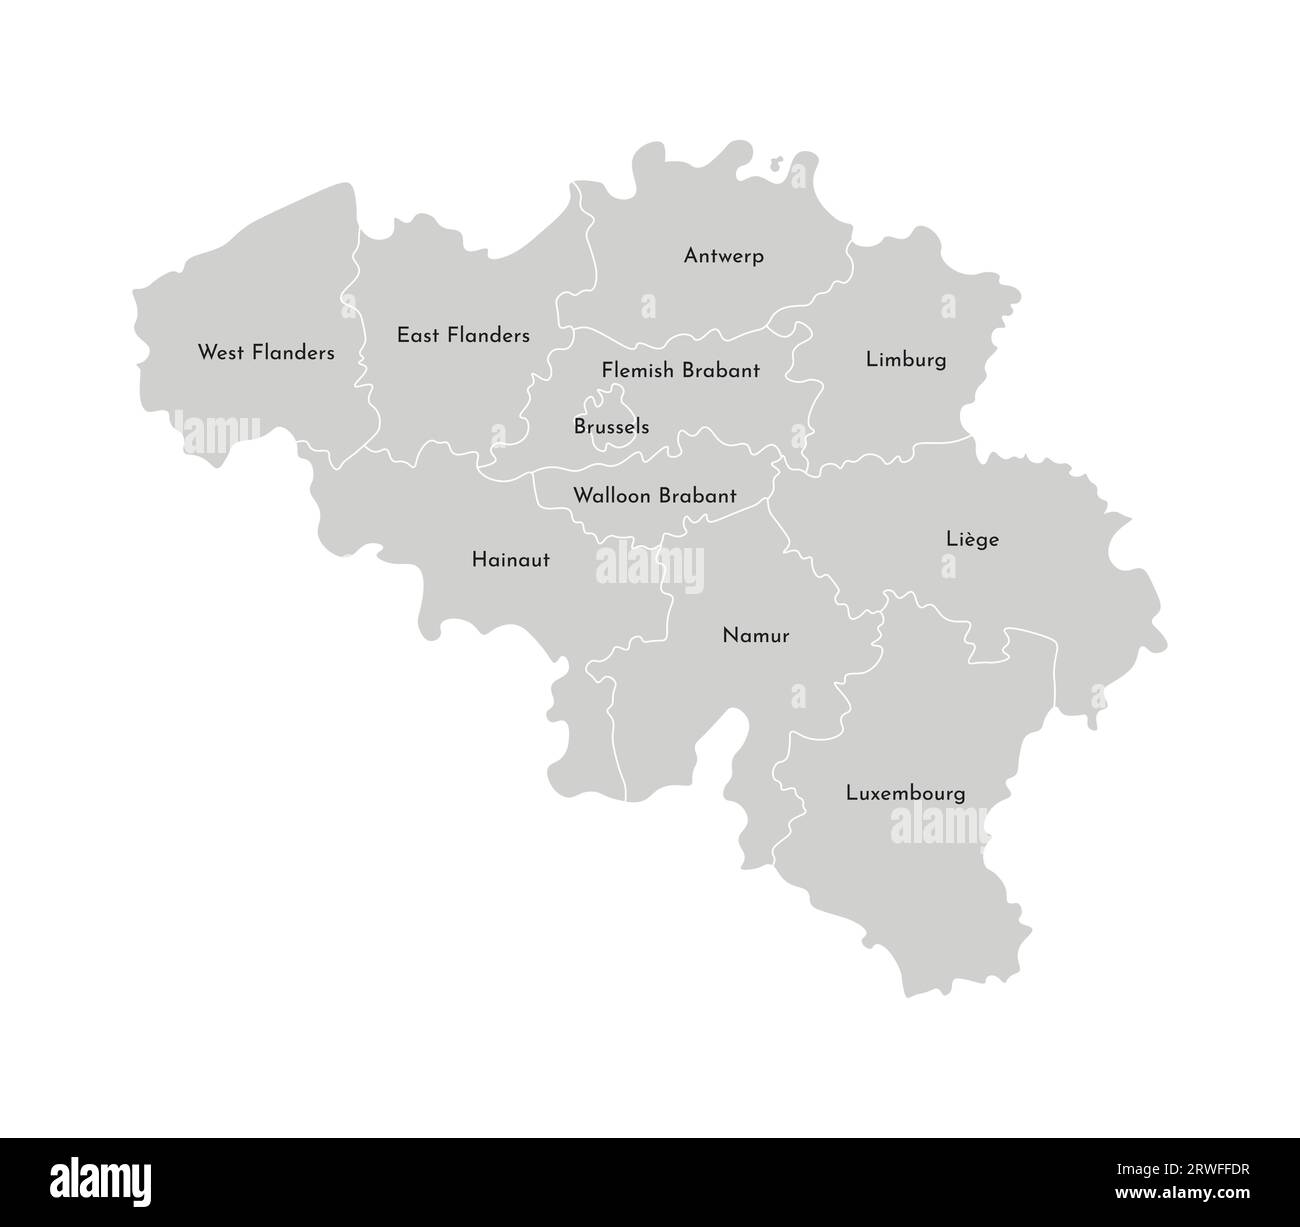 Vector isolated illustration of simplified administrative map of Belgium. Borders and names of the provinces (regions). Grey silhouettes. White outlin Stock Vector